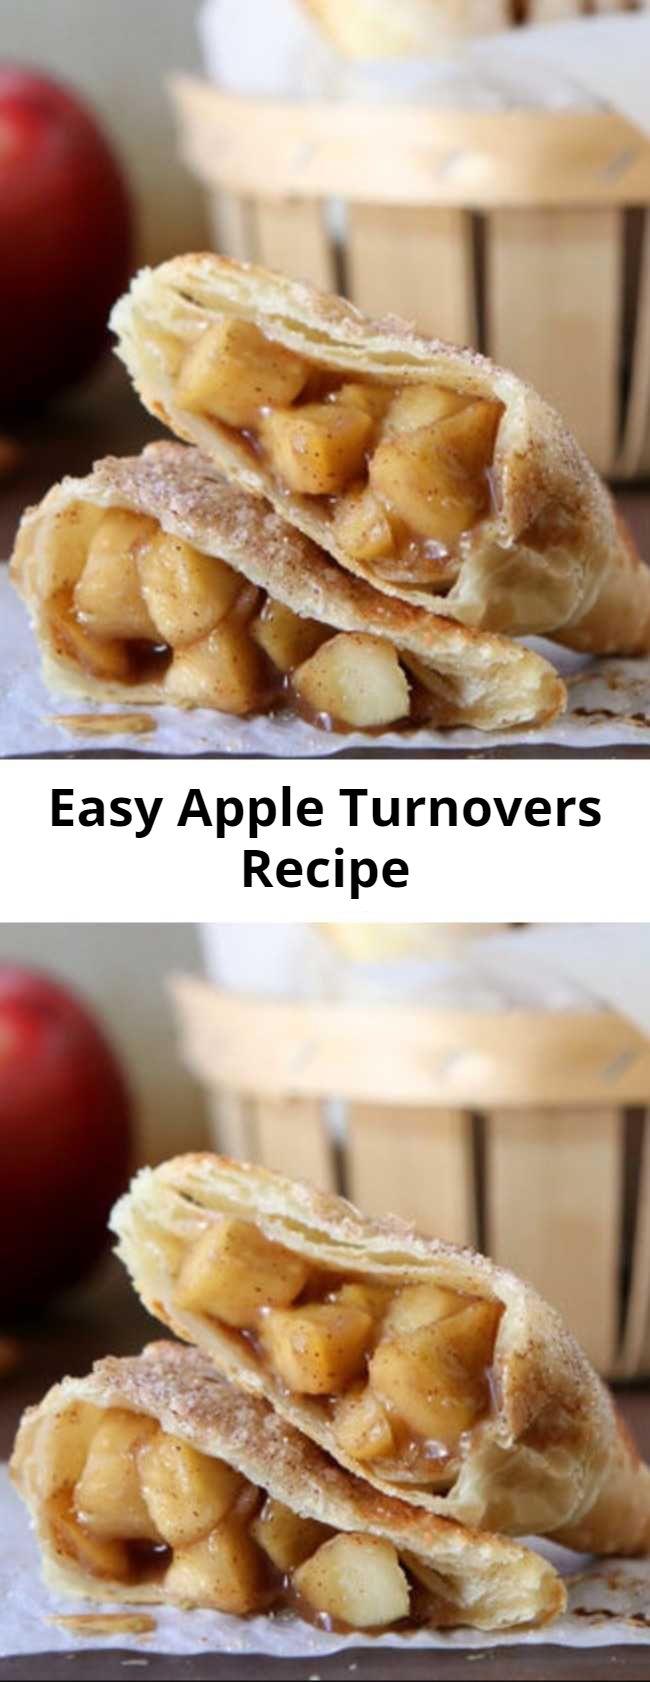 Easy Apple Turnovers Recipe - Forgo bakery-made sweets and try making your own apple turnovers at home. It’s easier than you think!